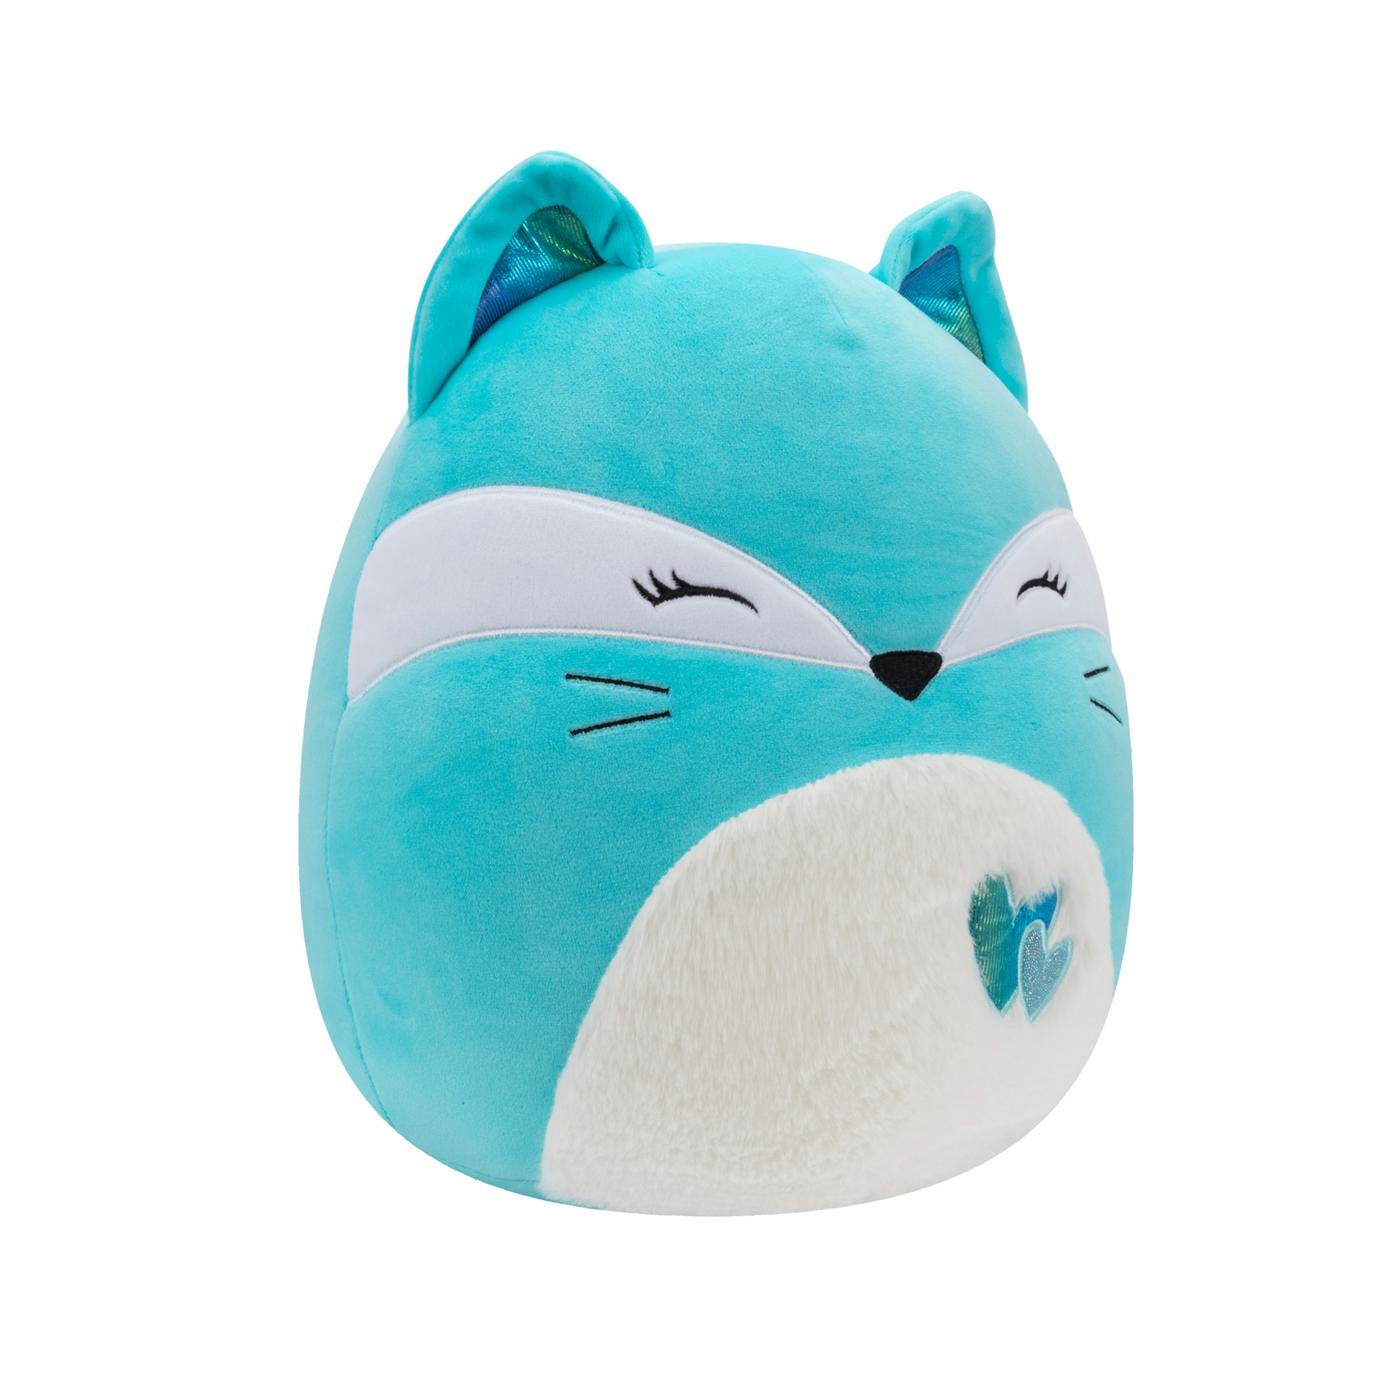 Squishmallows Pania the Teal Fox Valentine's Plush; image 3 of 3